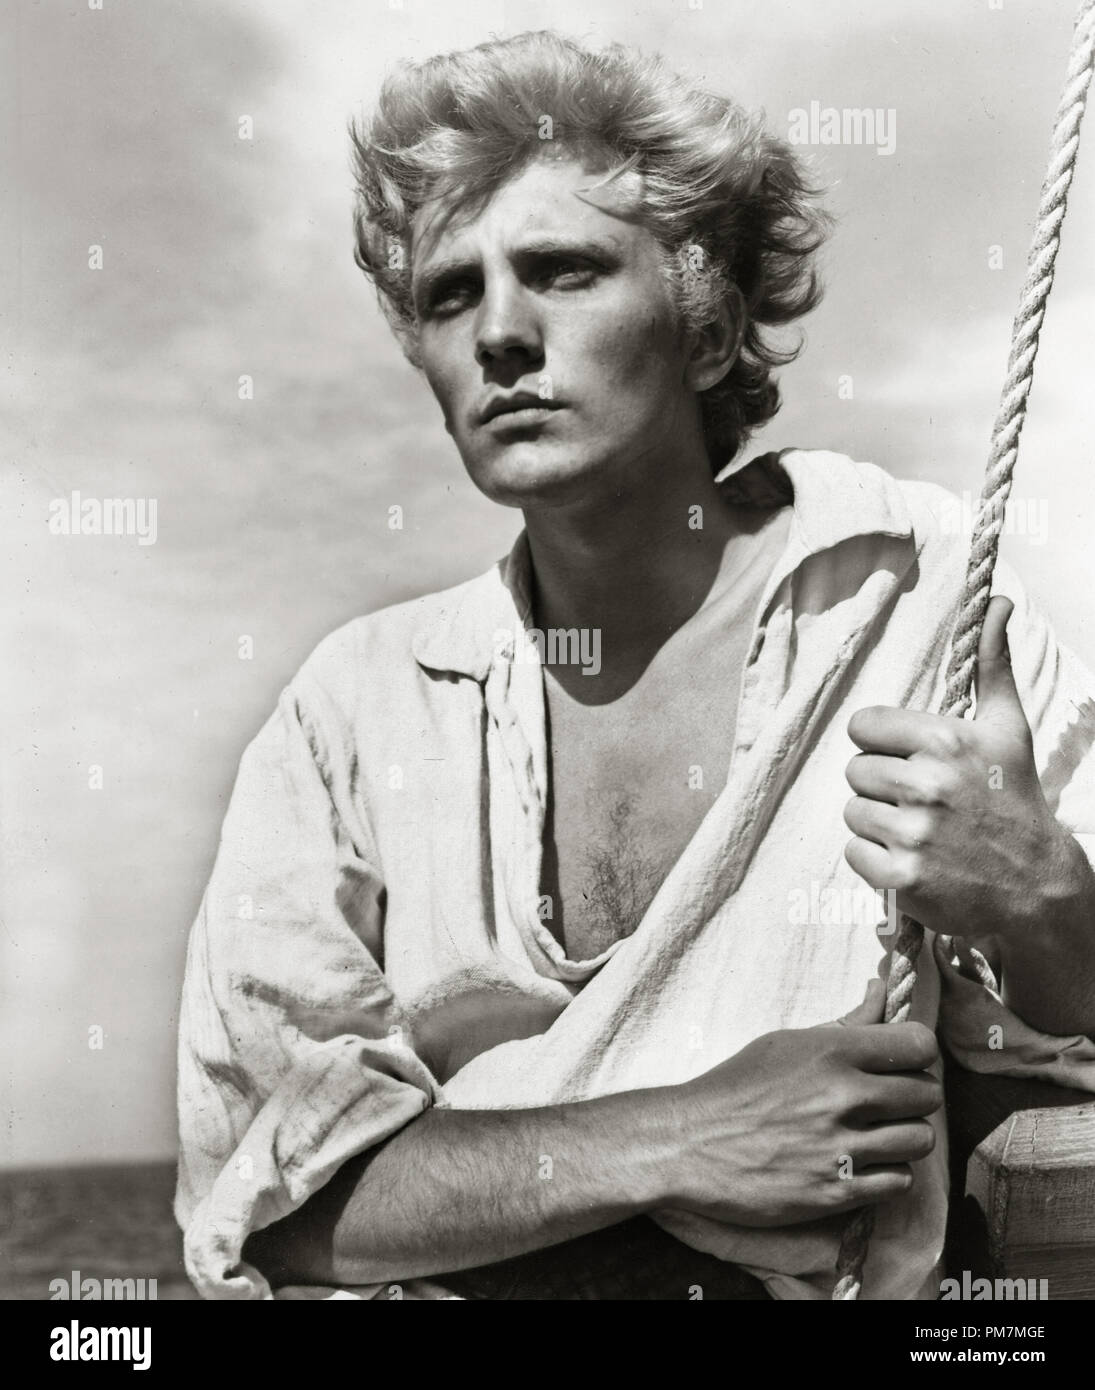 Terence Stamp,'Billy Budd' 1962 Archivo de referencia # 31202 317tha Foto de stock